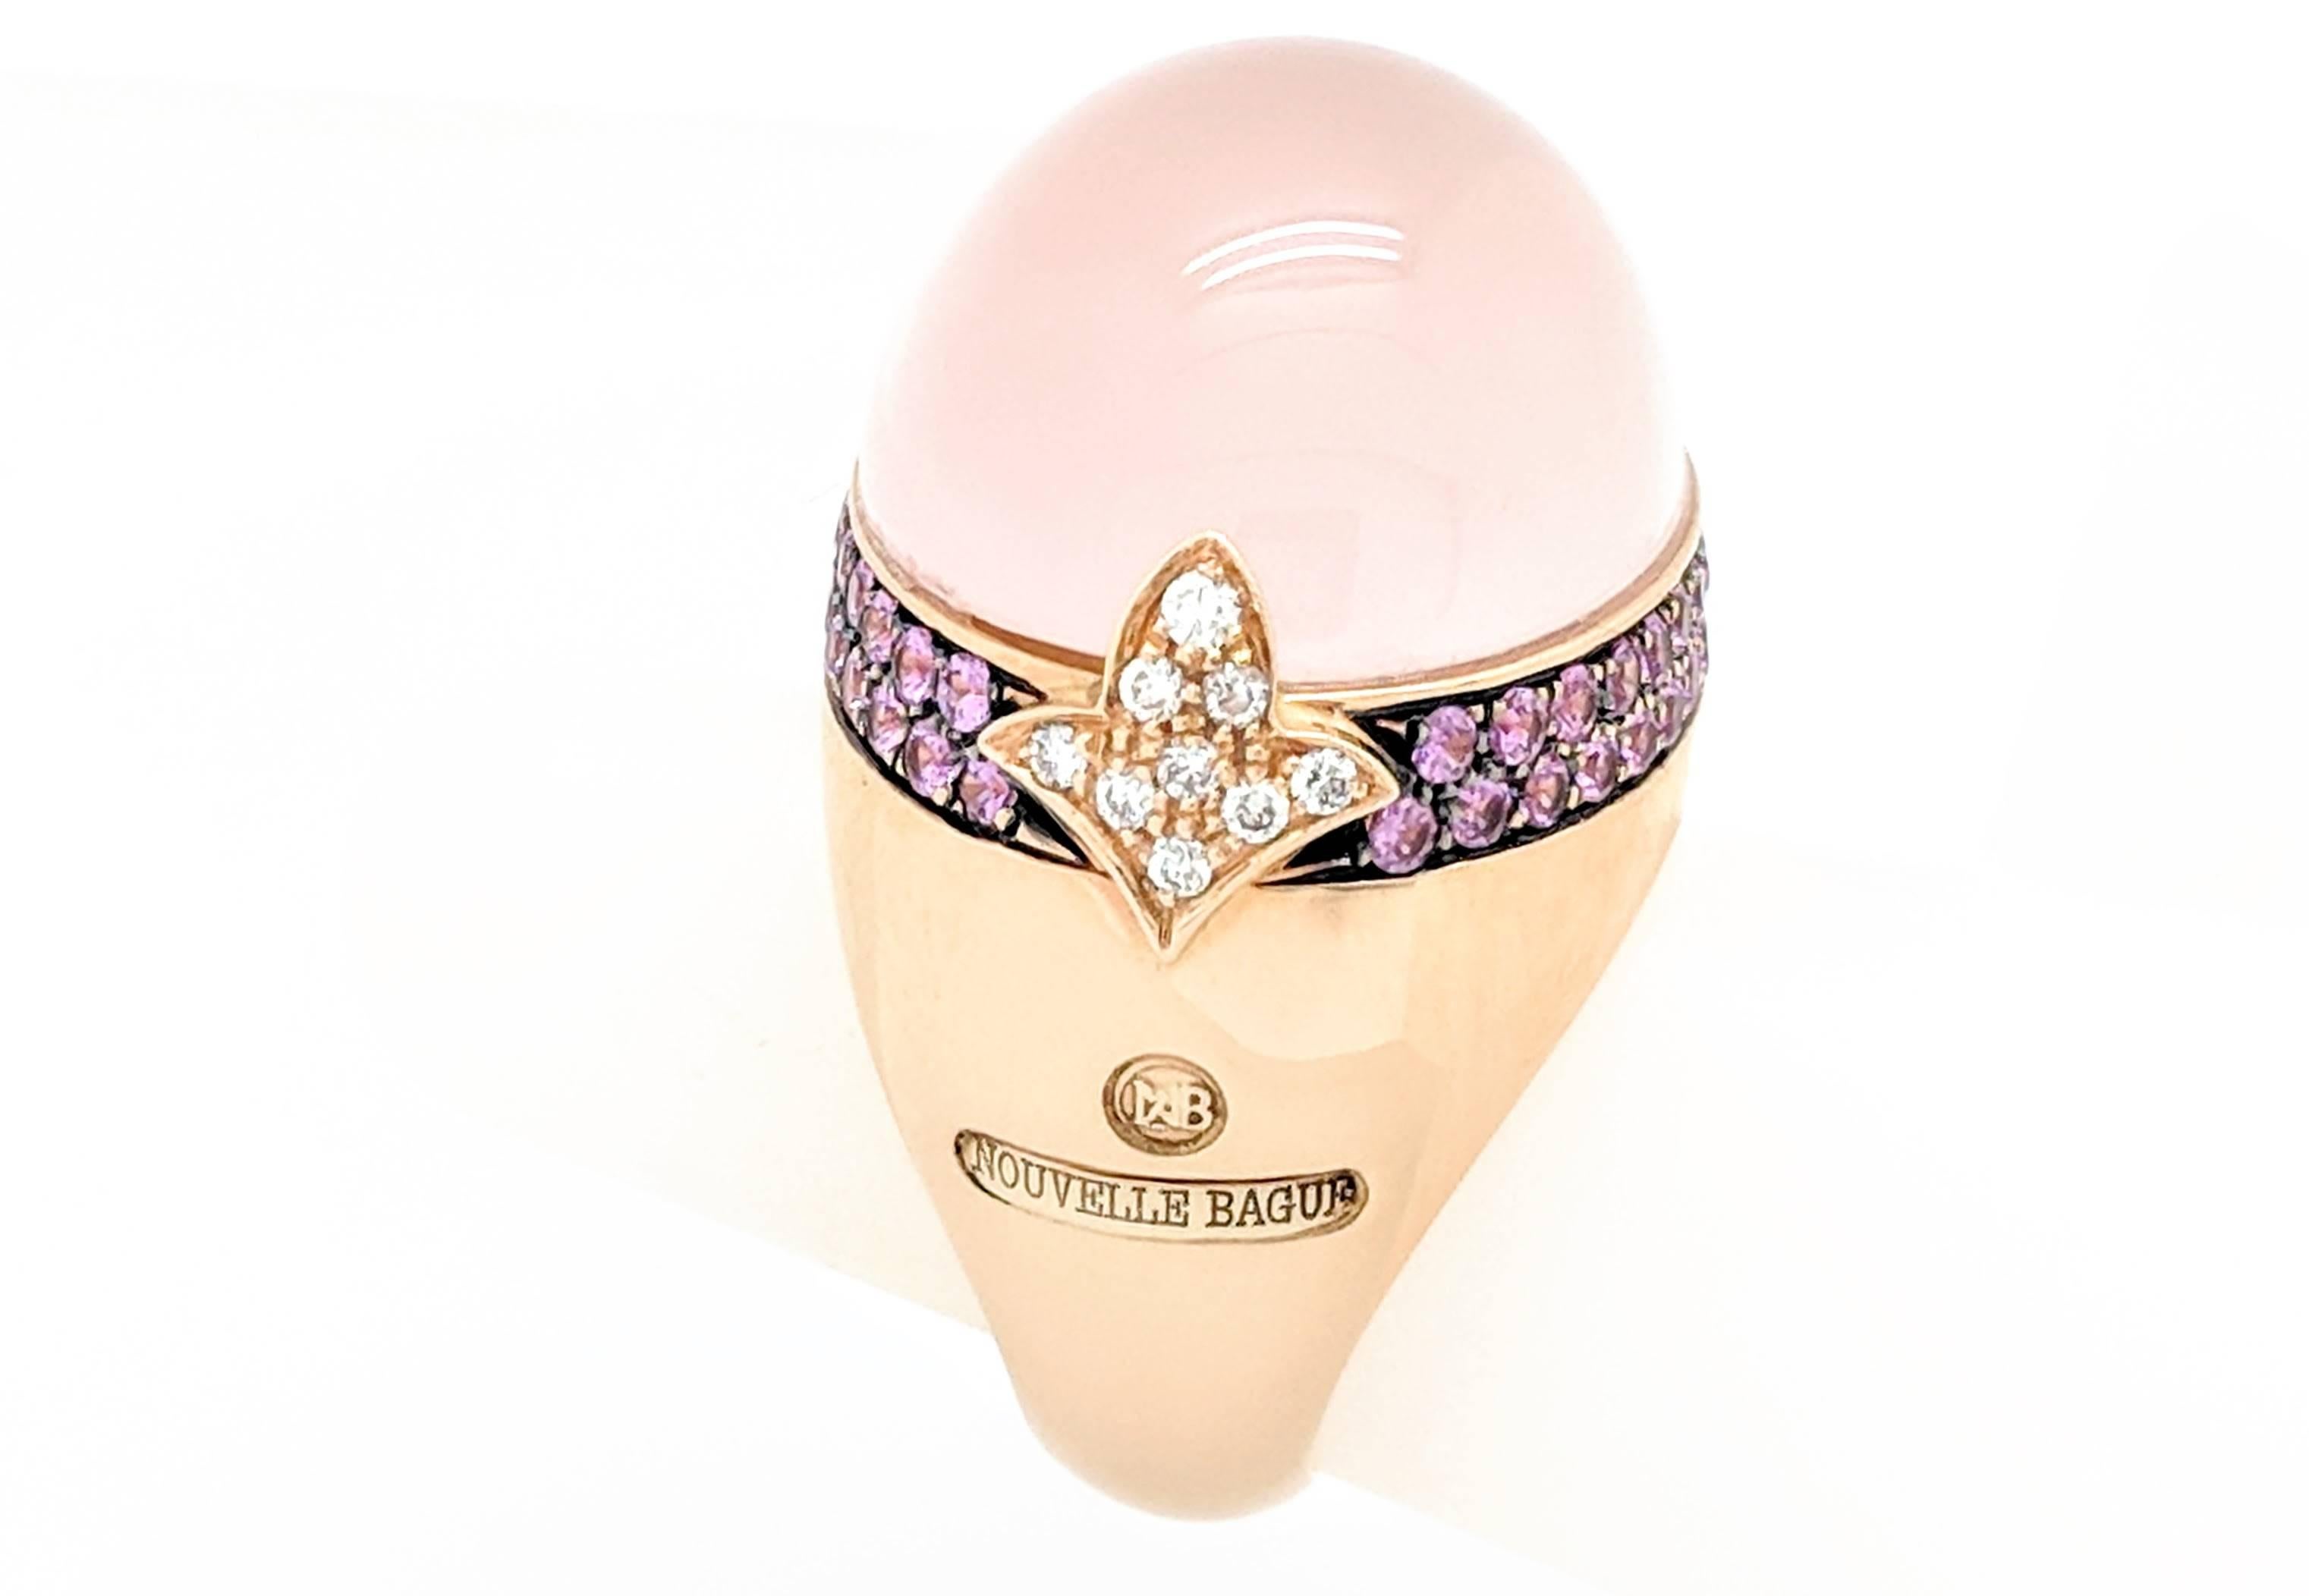 Nouvelle Bague 18 Karat Gold Cabochon Coral Pink Sapphires and Diamond Dome Ring 1